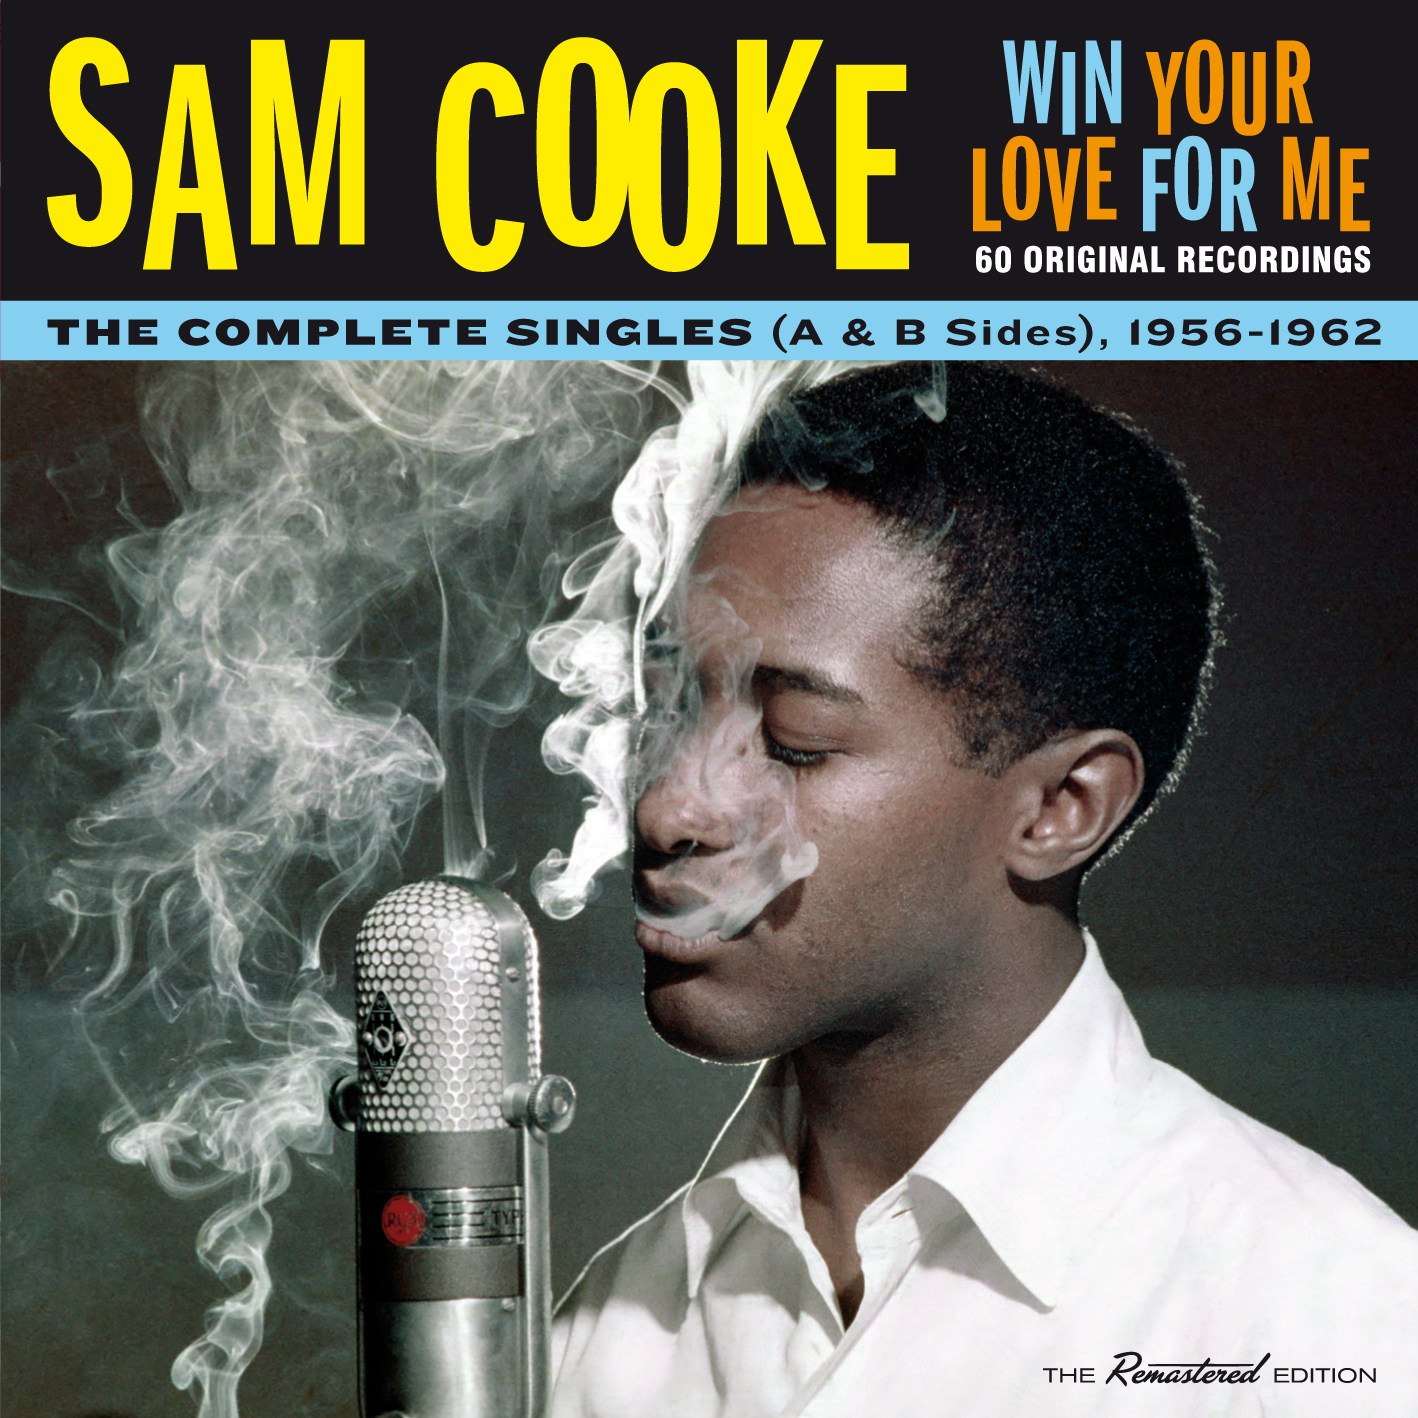 WIN YOUR LOVE FOR ME (THE COMPLETE SINGLES 1956-1962 - A & B SIDES)